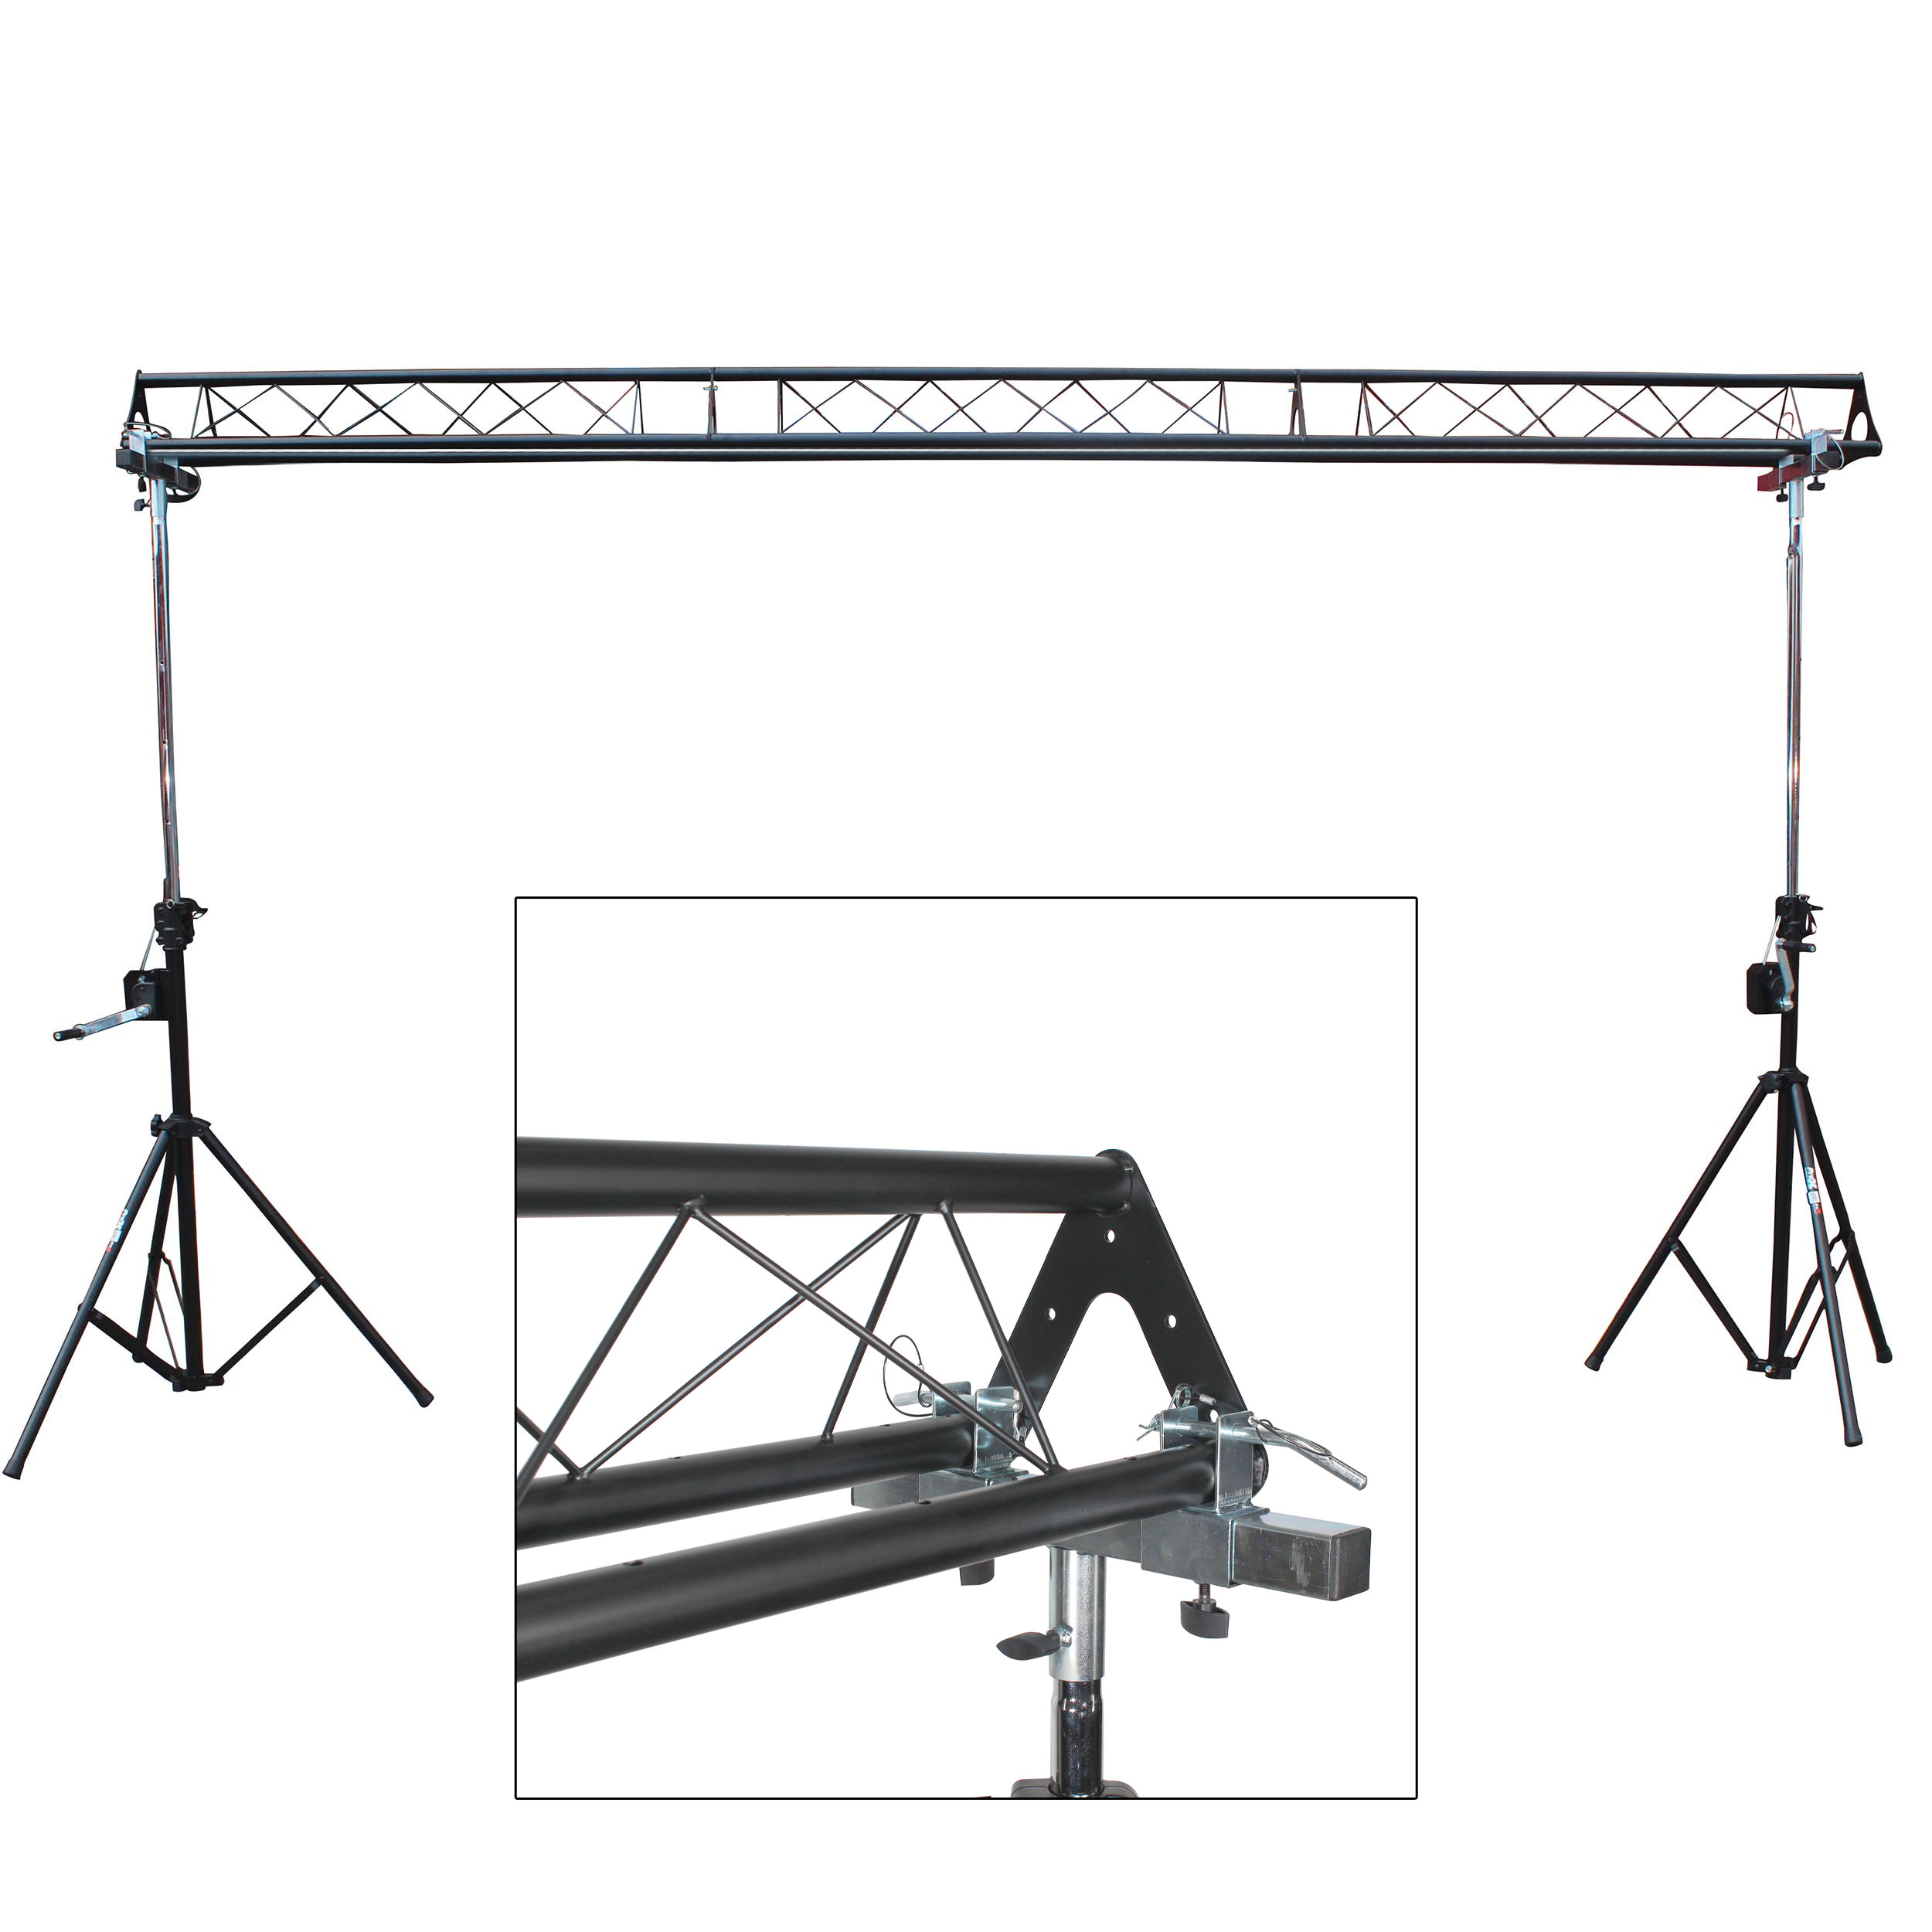 DJ Production Crank Up Lighting System Triangle Truss System 14.25-inch wide 200lbs Capacity